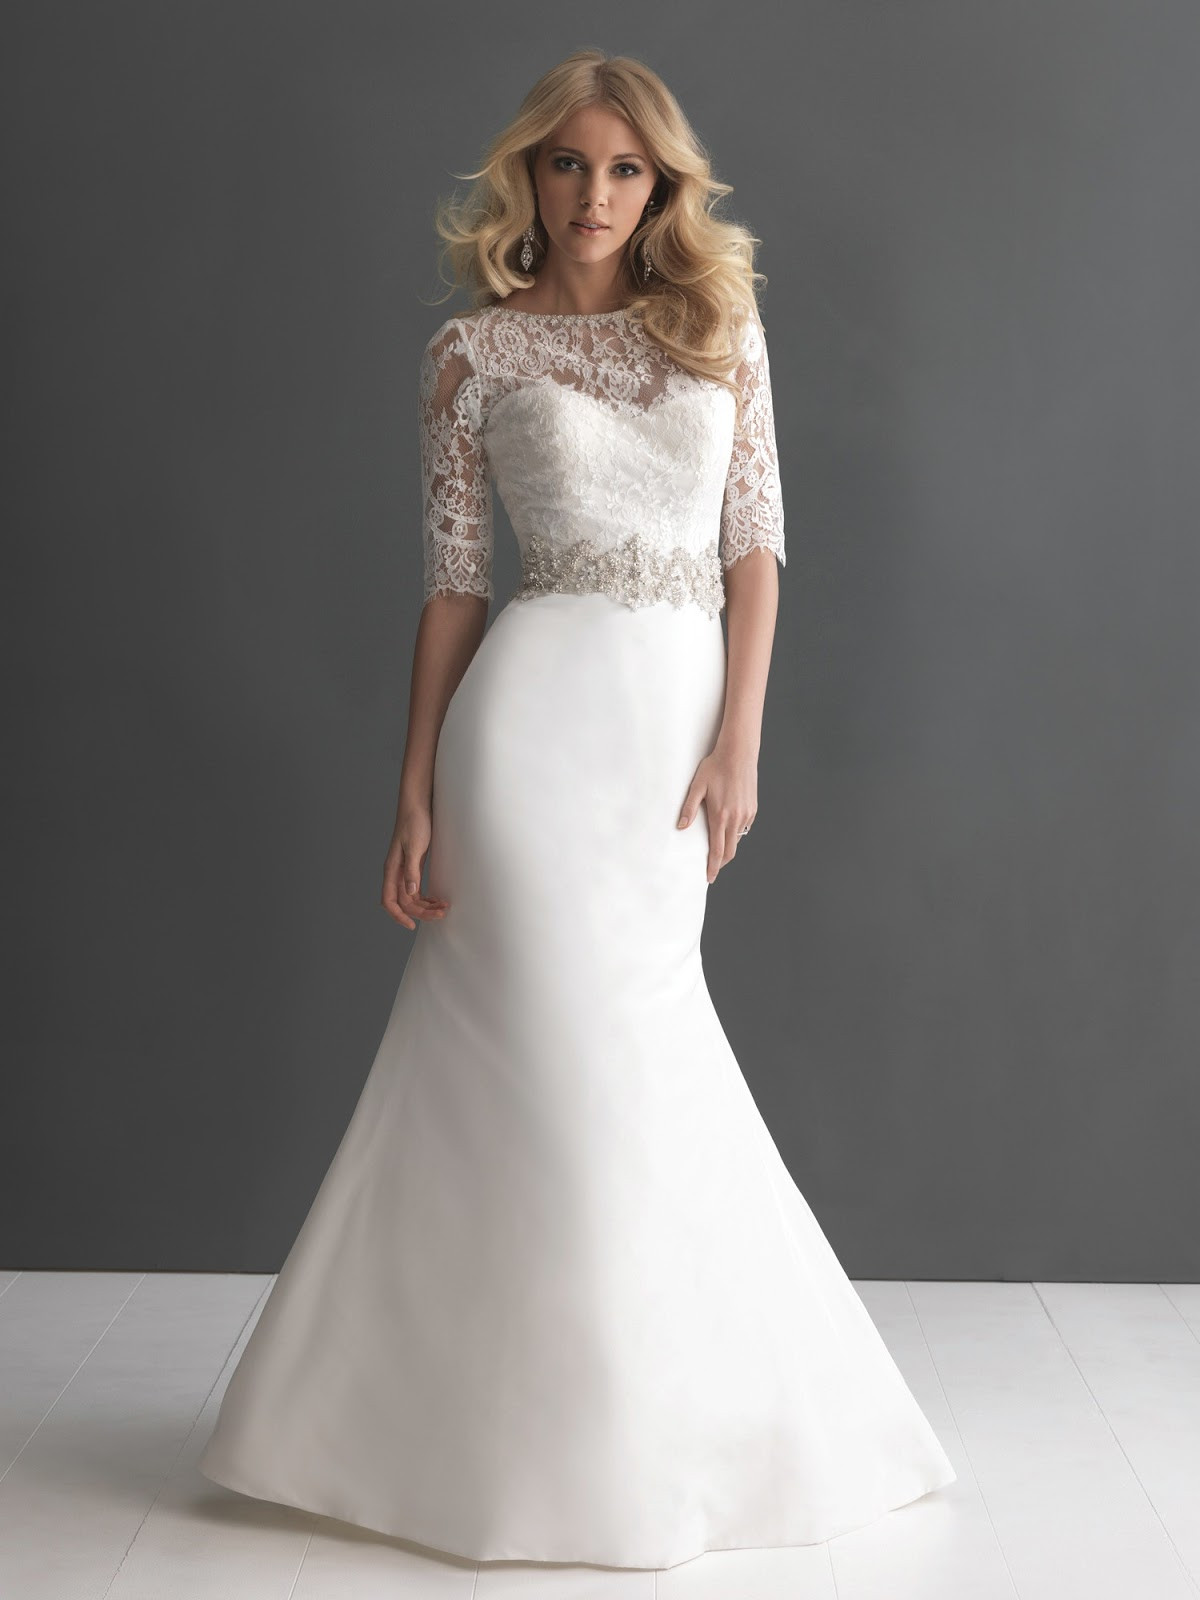 Pictures Of Wedding Gowns
 DressyBridal Allure Wedding Dresses Fall 2013 Collection